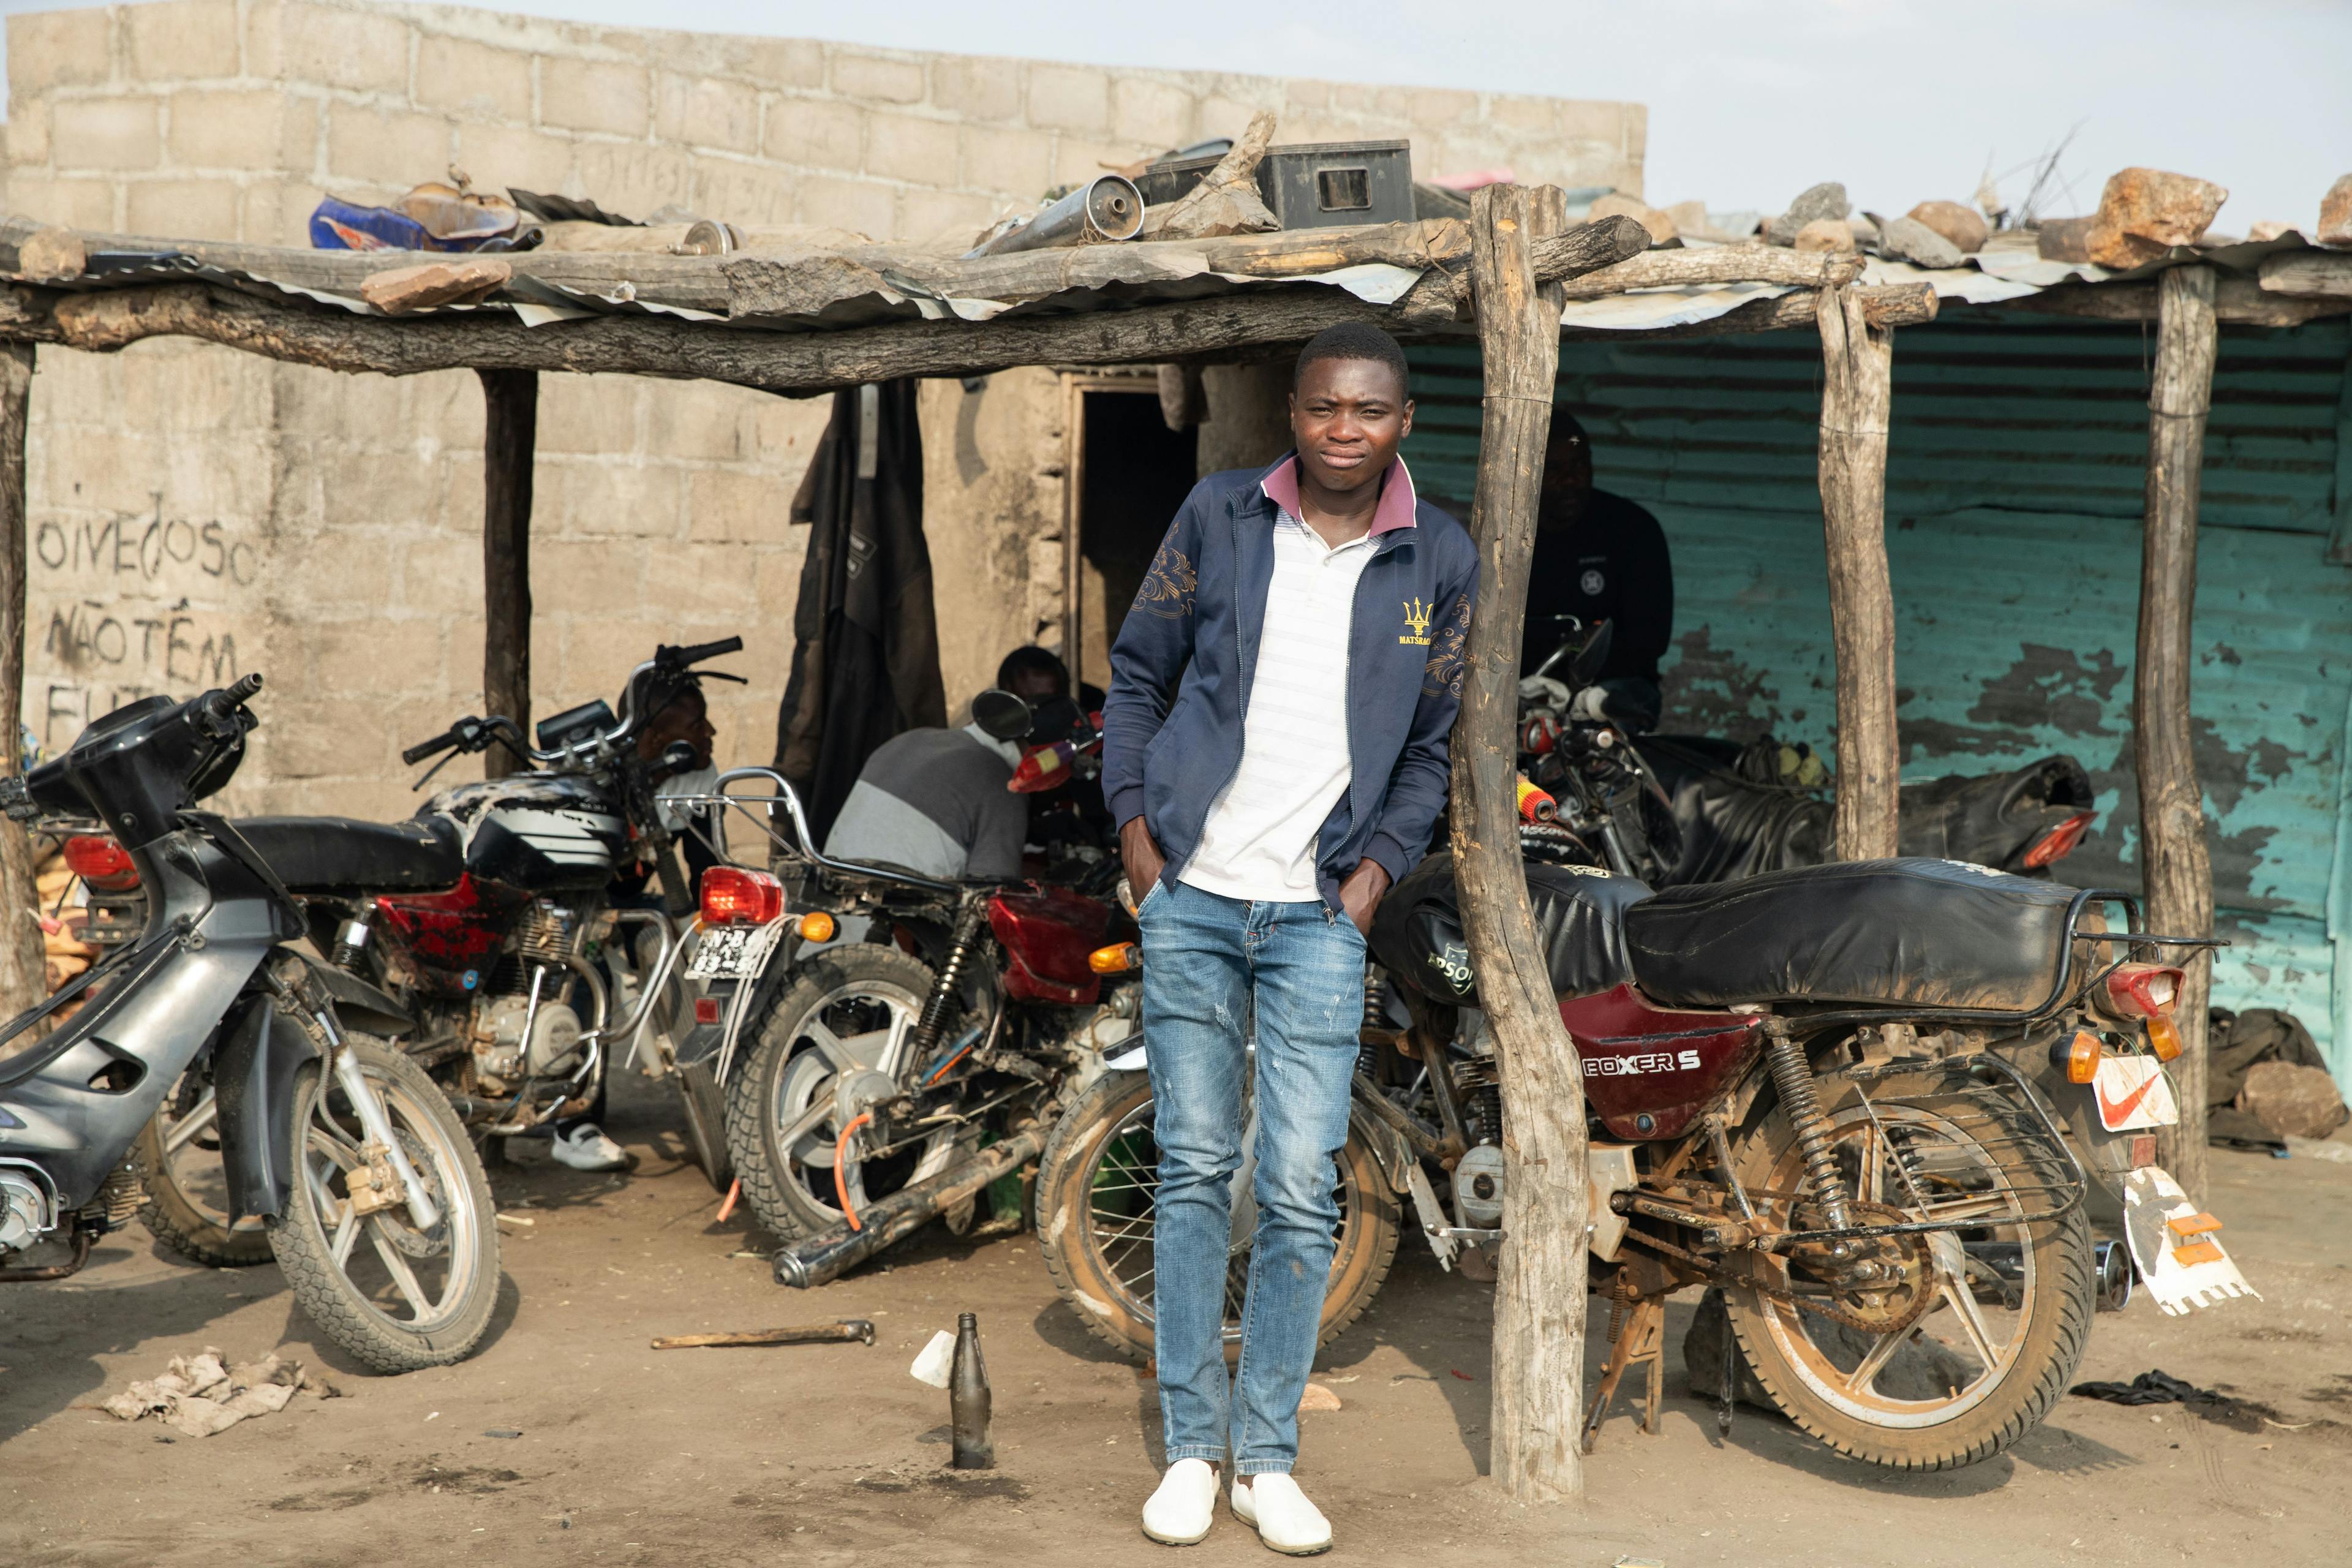 Living in hope, despite climate woes. Even though Africans are already living through the first waves of climate shocks and stressors, they are optimistic and expect their lives will improve. This hope can be a source of resilience. Bernardo Kaupiquitua (19) hopes for more, working as a mechanic while he finds his feet here.